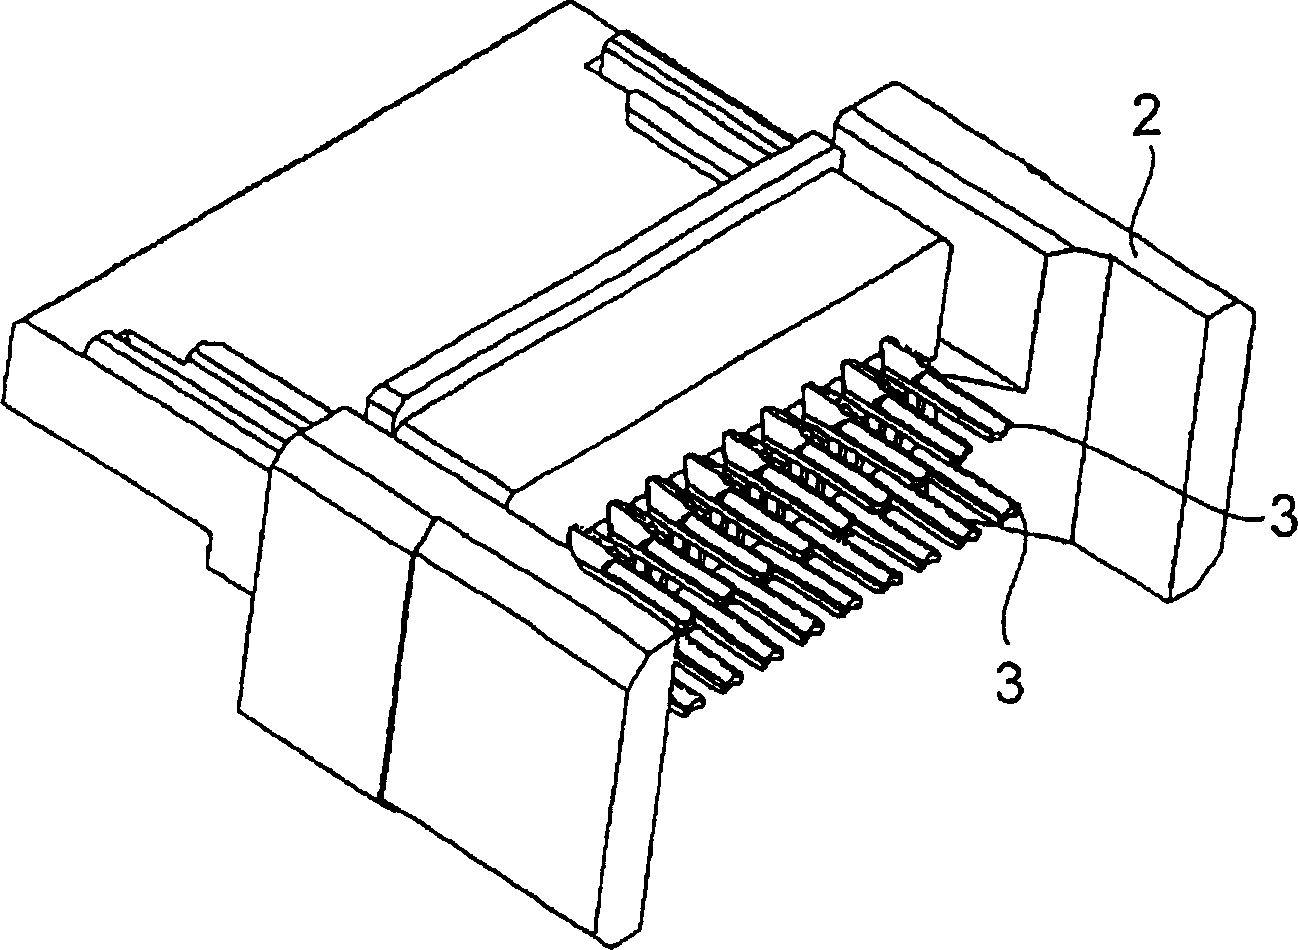 Contact holding structure of connector